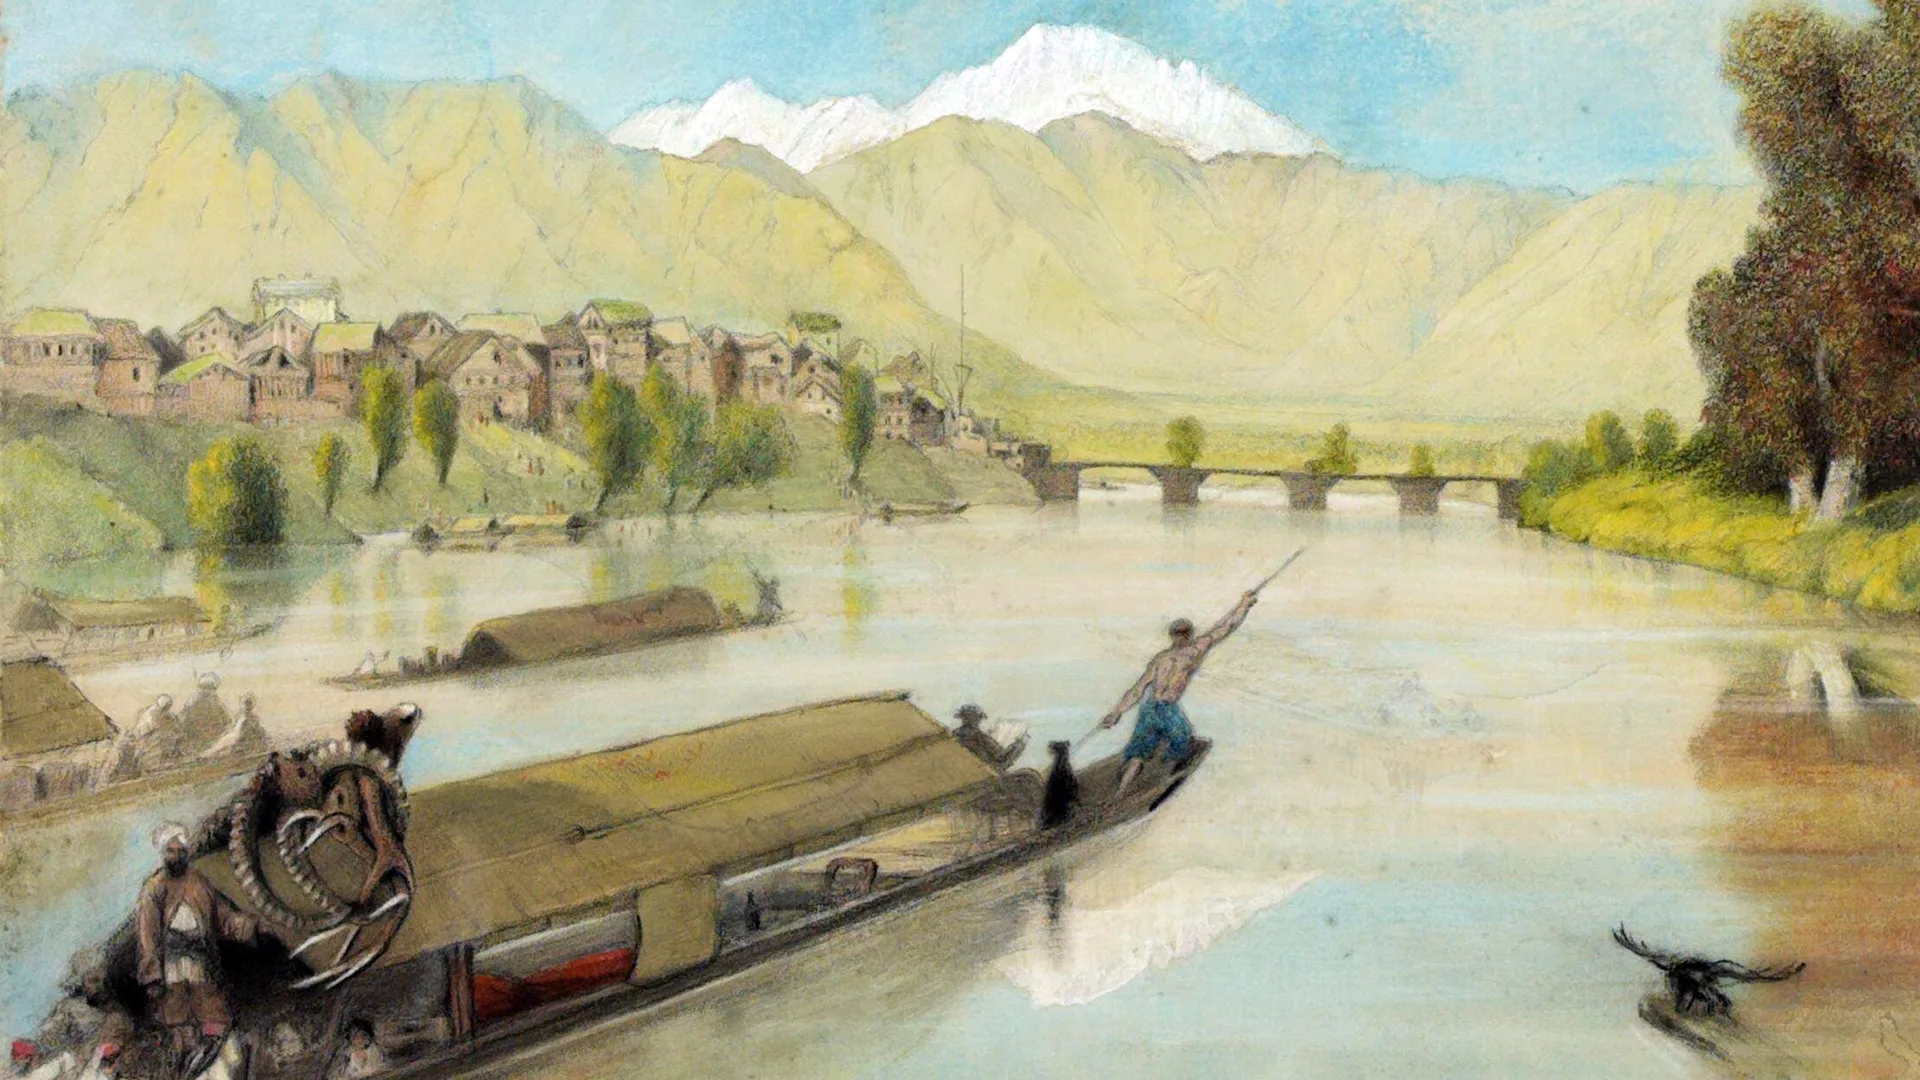 A painting from 1860 showing a riverboat scene with a man pointing forward on the boat. In the distance are snowcapped mountained and blue skies.